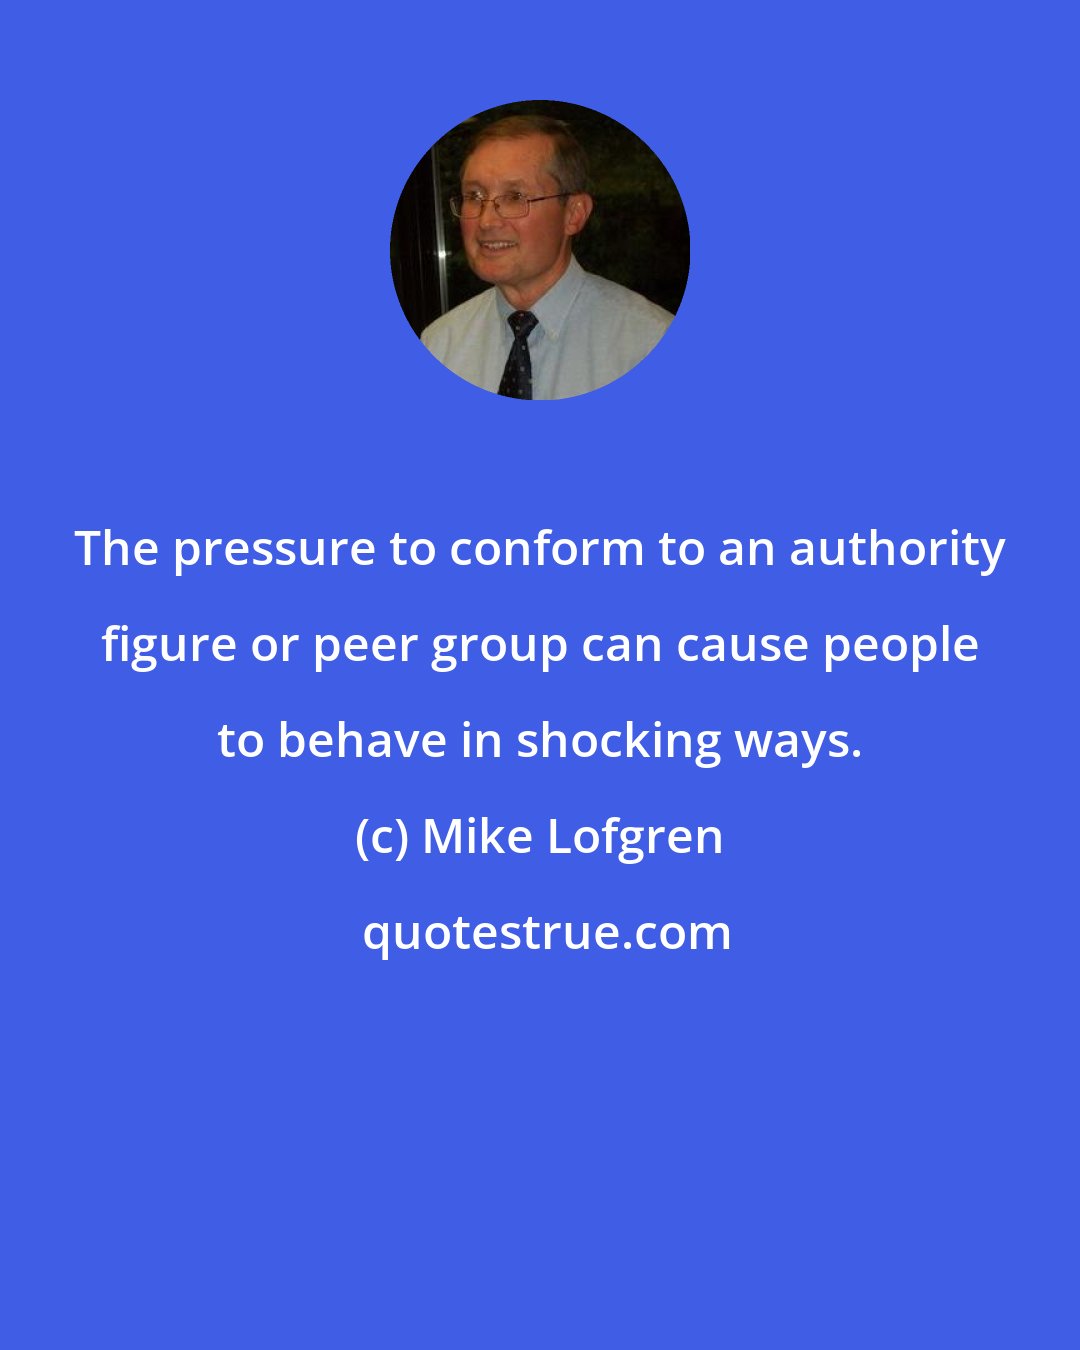 Mike Lofgren: The pressure to conform to an authority figure or peer group can cause people to behave in shocking ways.